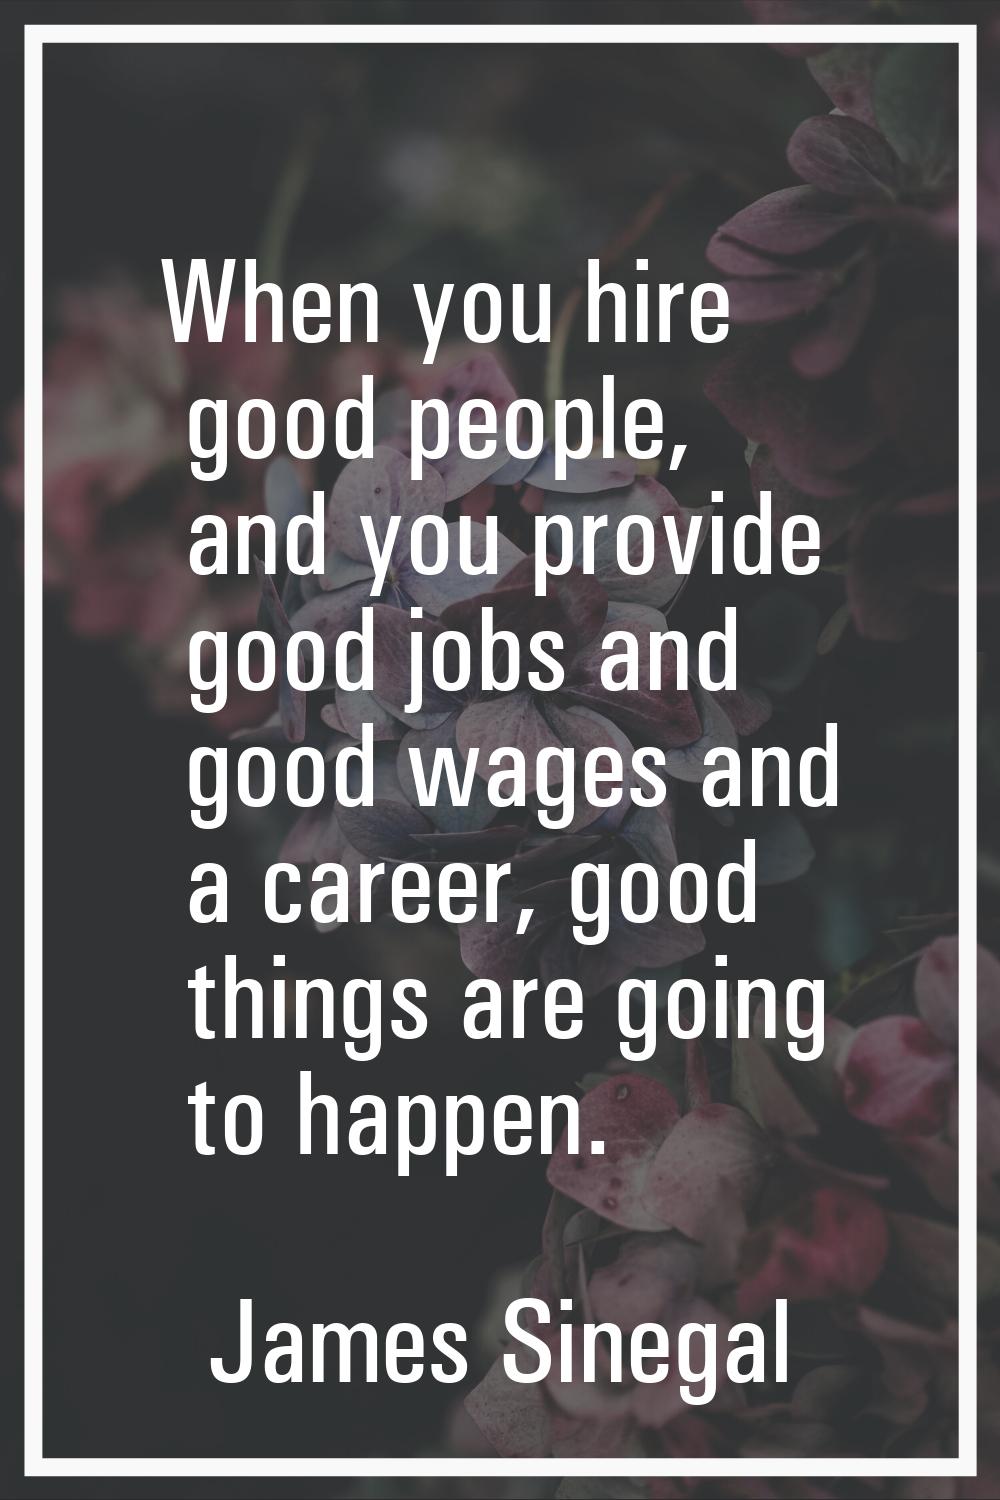 When you hire good people, and you provide good jobs and good wages and a career, good things are g